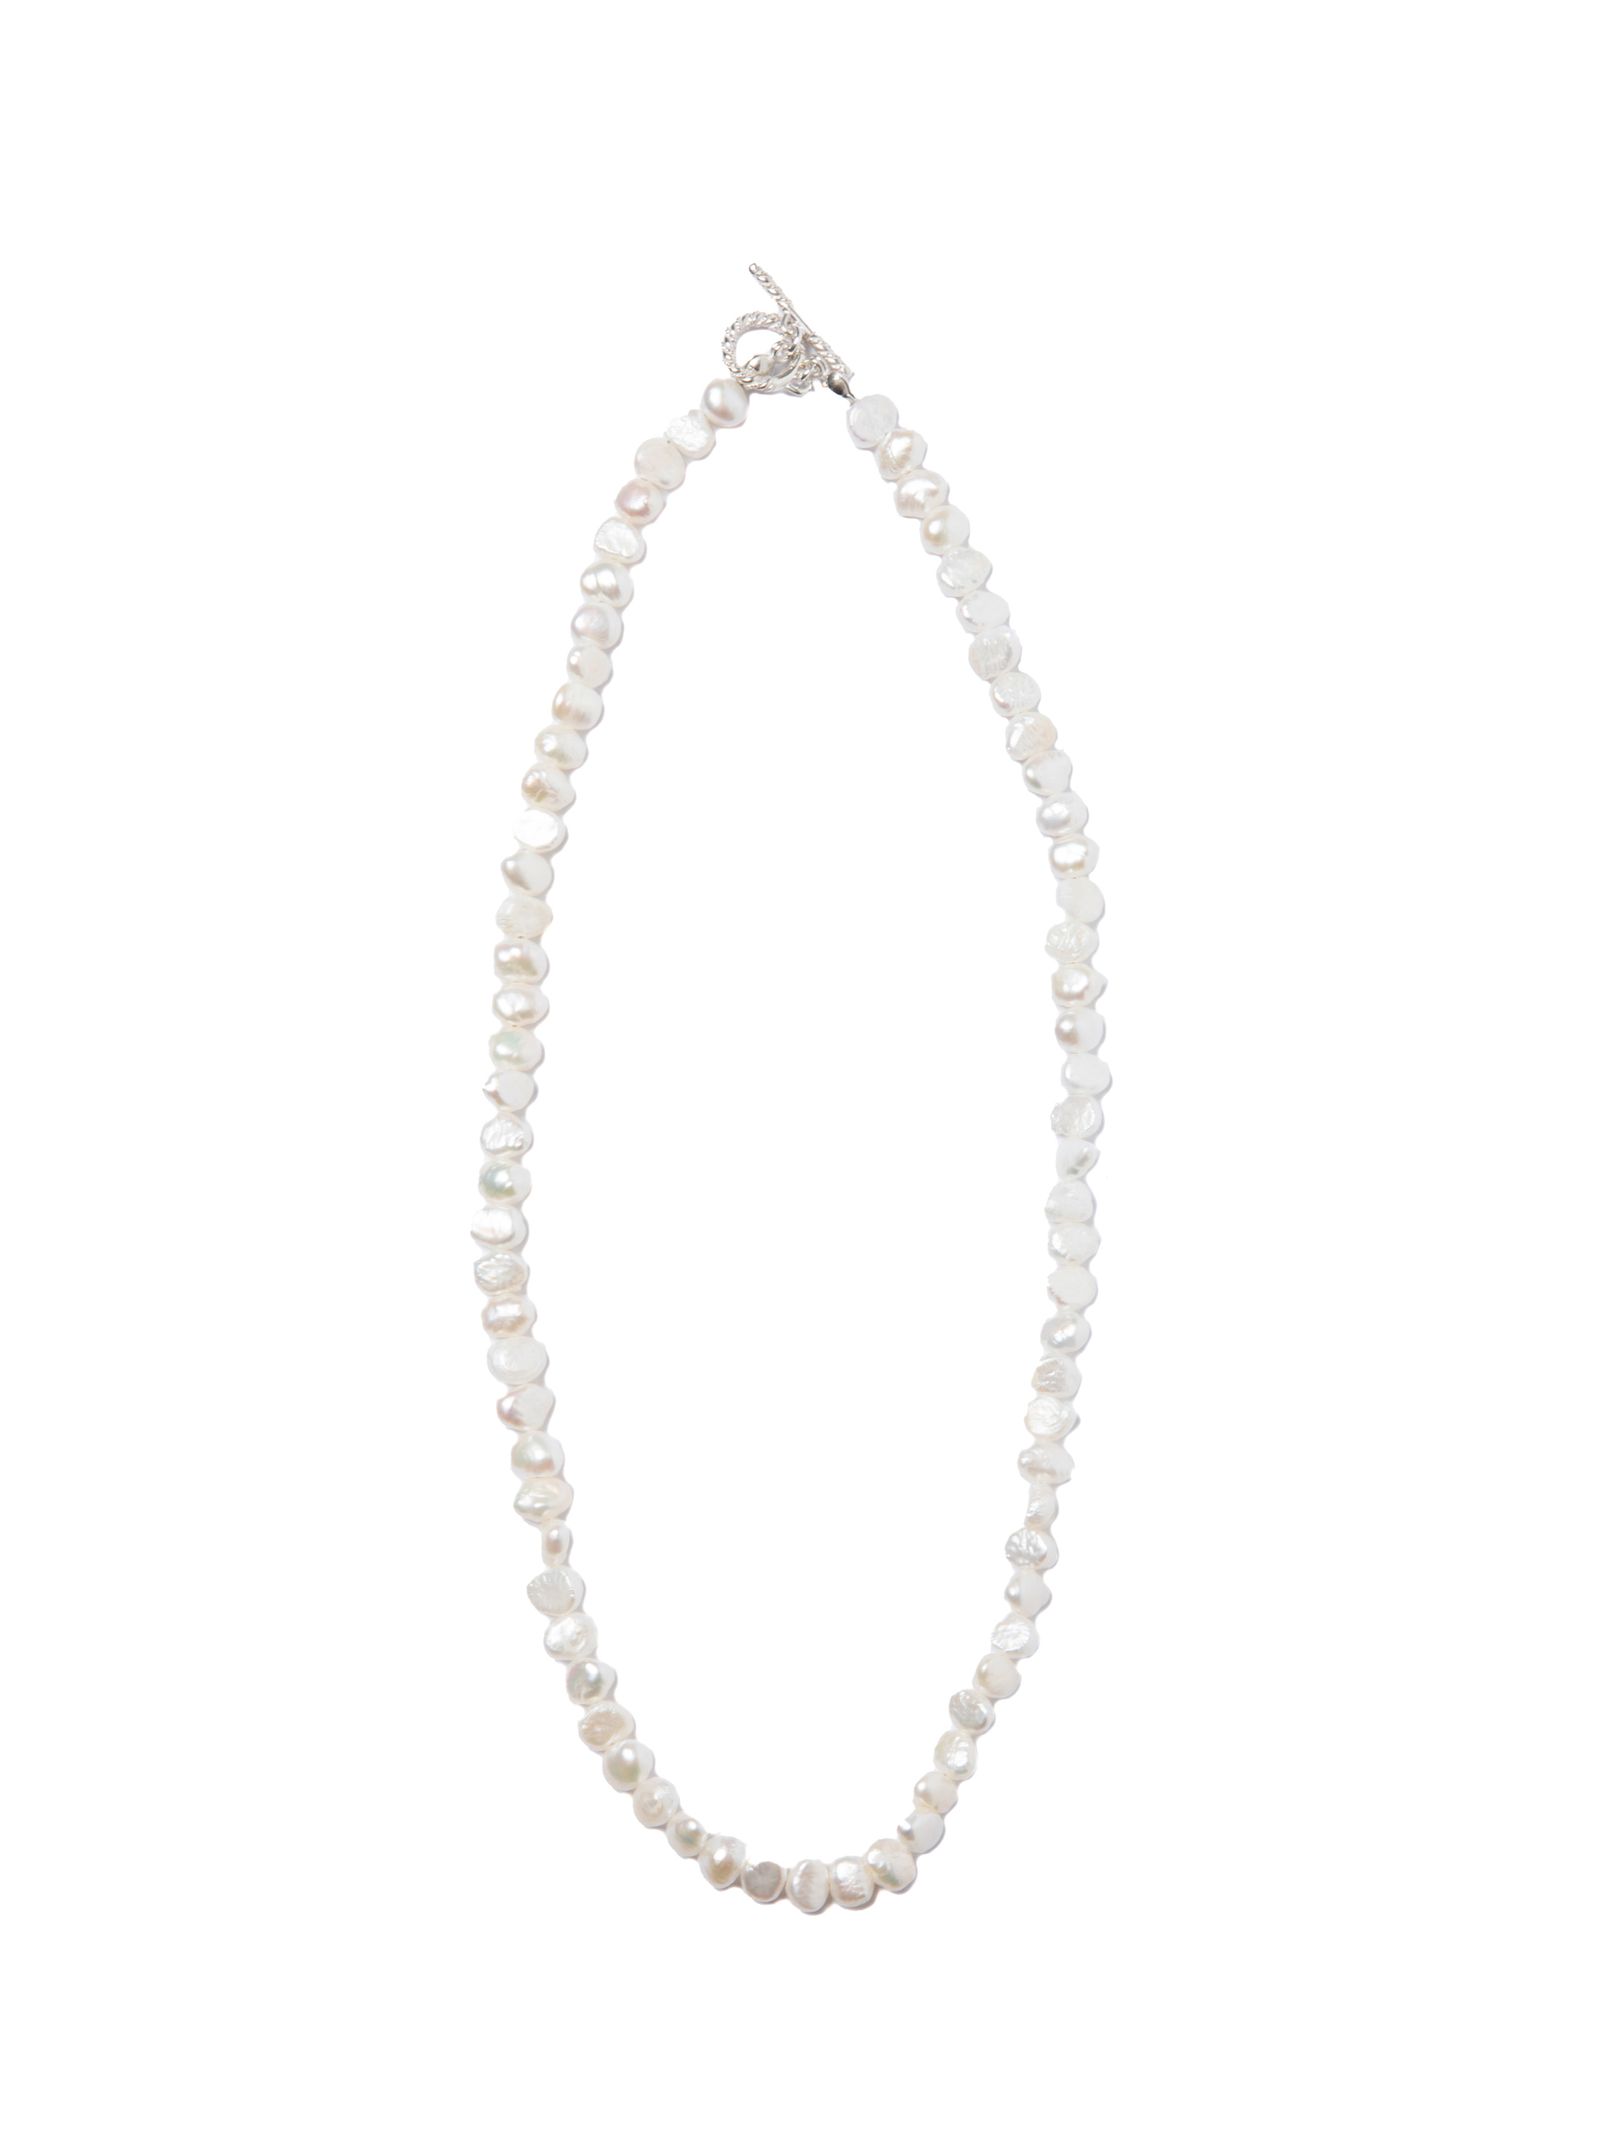 Distortion Pearl Necklace / WHITE / パールネックレス - M